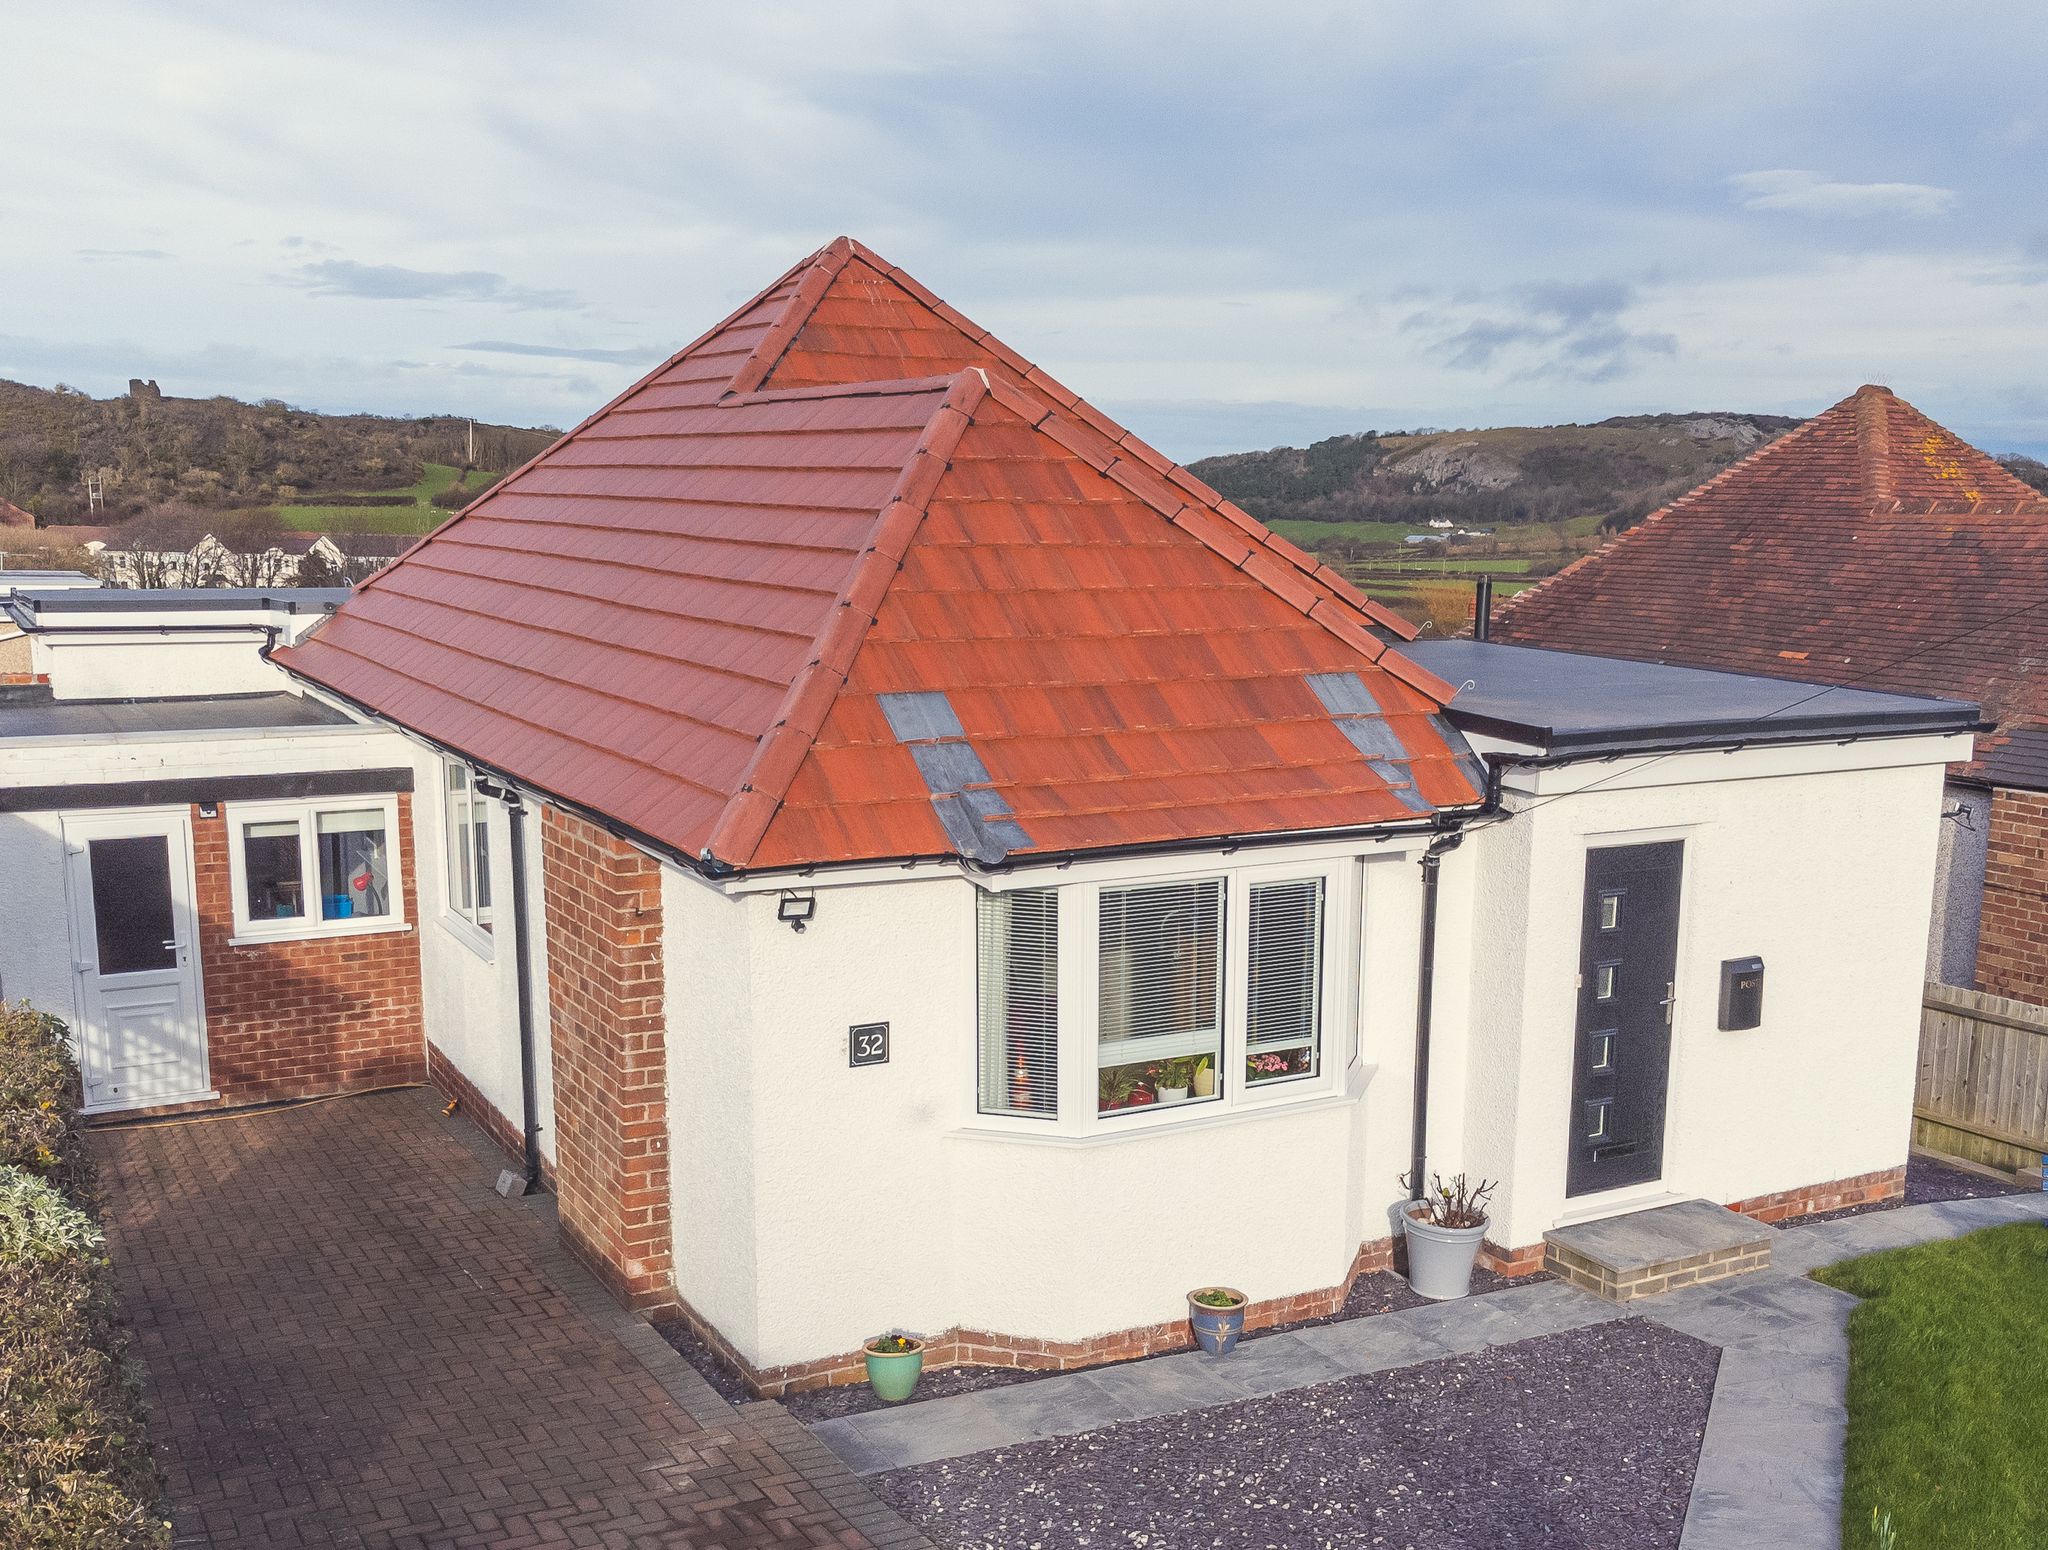 Tile Roof Contractors Clynnog-fawr, LL54 - DD Roofing